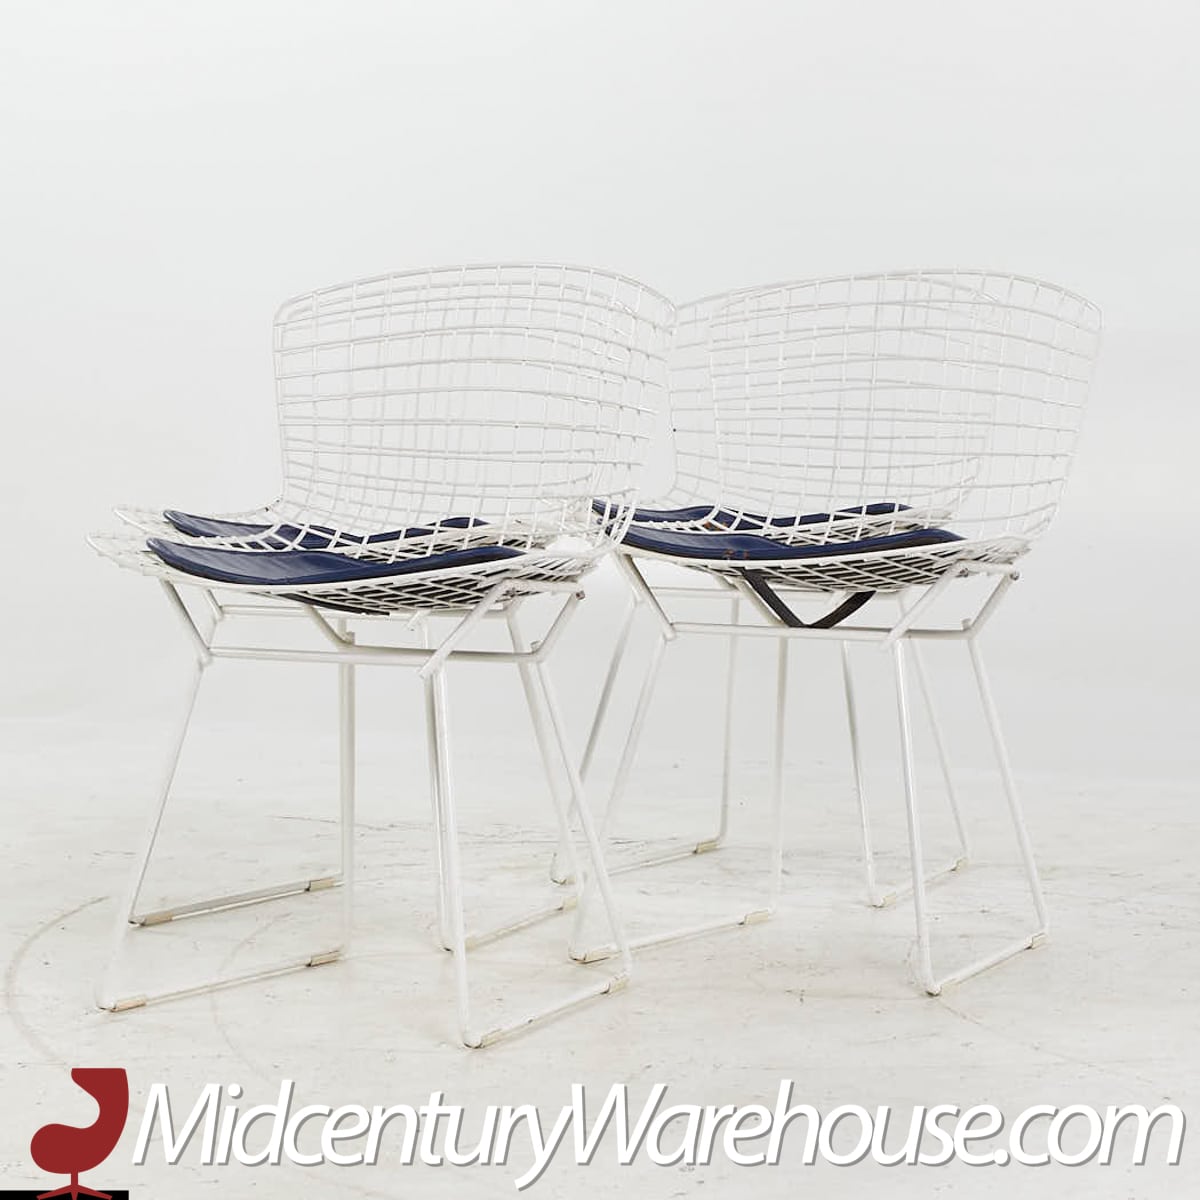 Harry Bertoia for Knoll Mid Century Dining Chairs - Set of 4